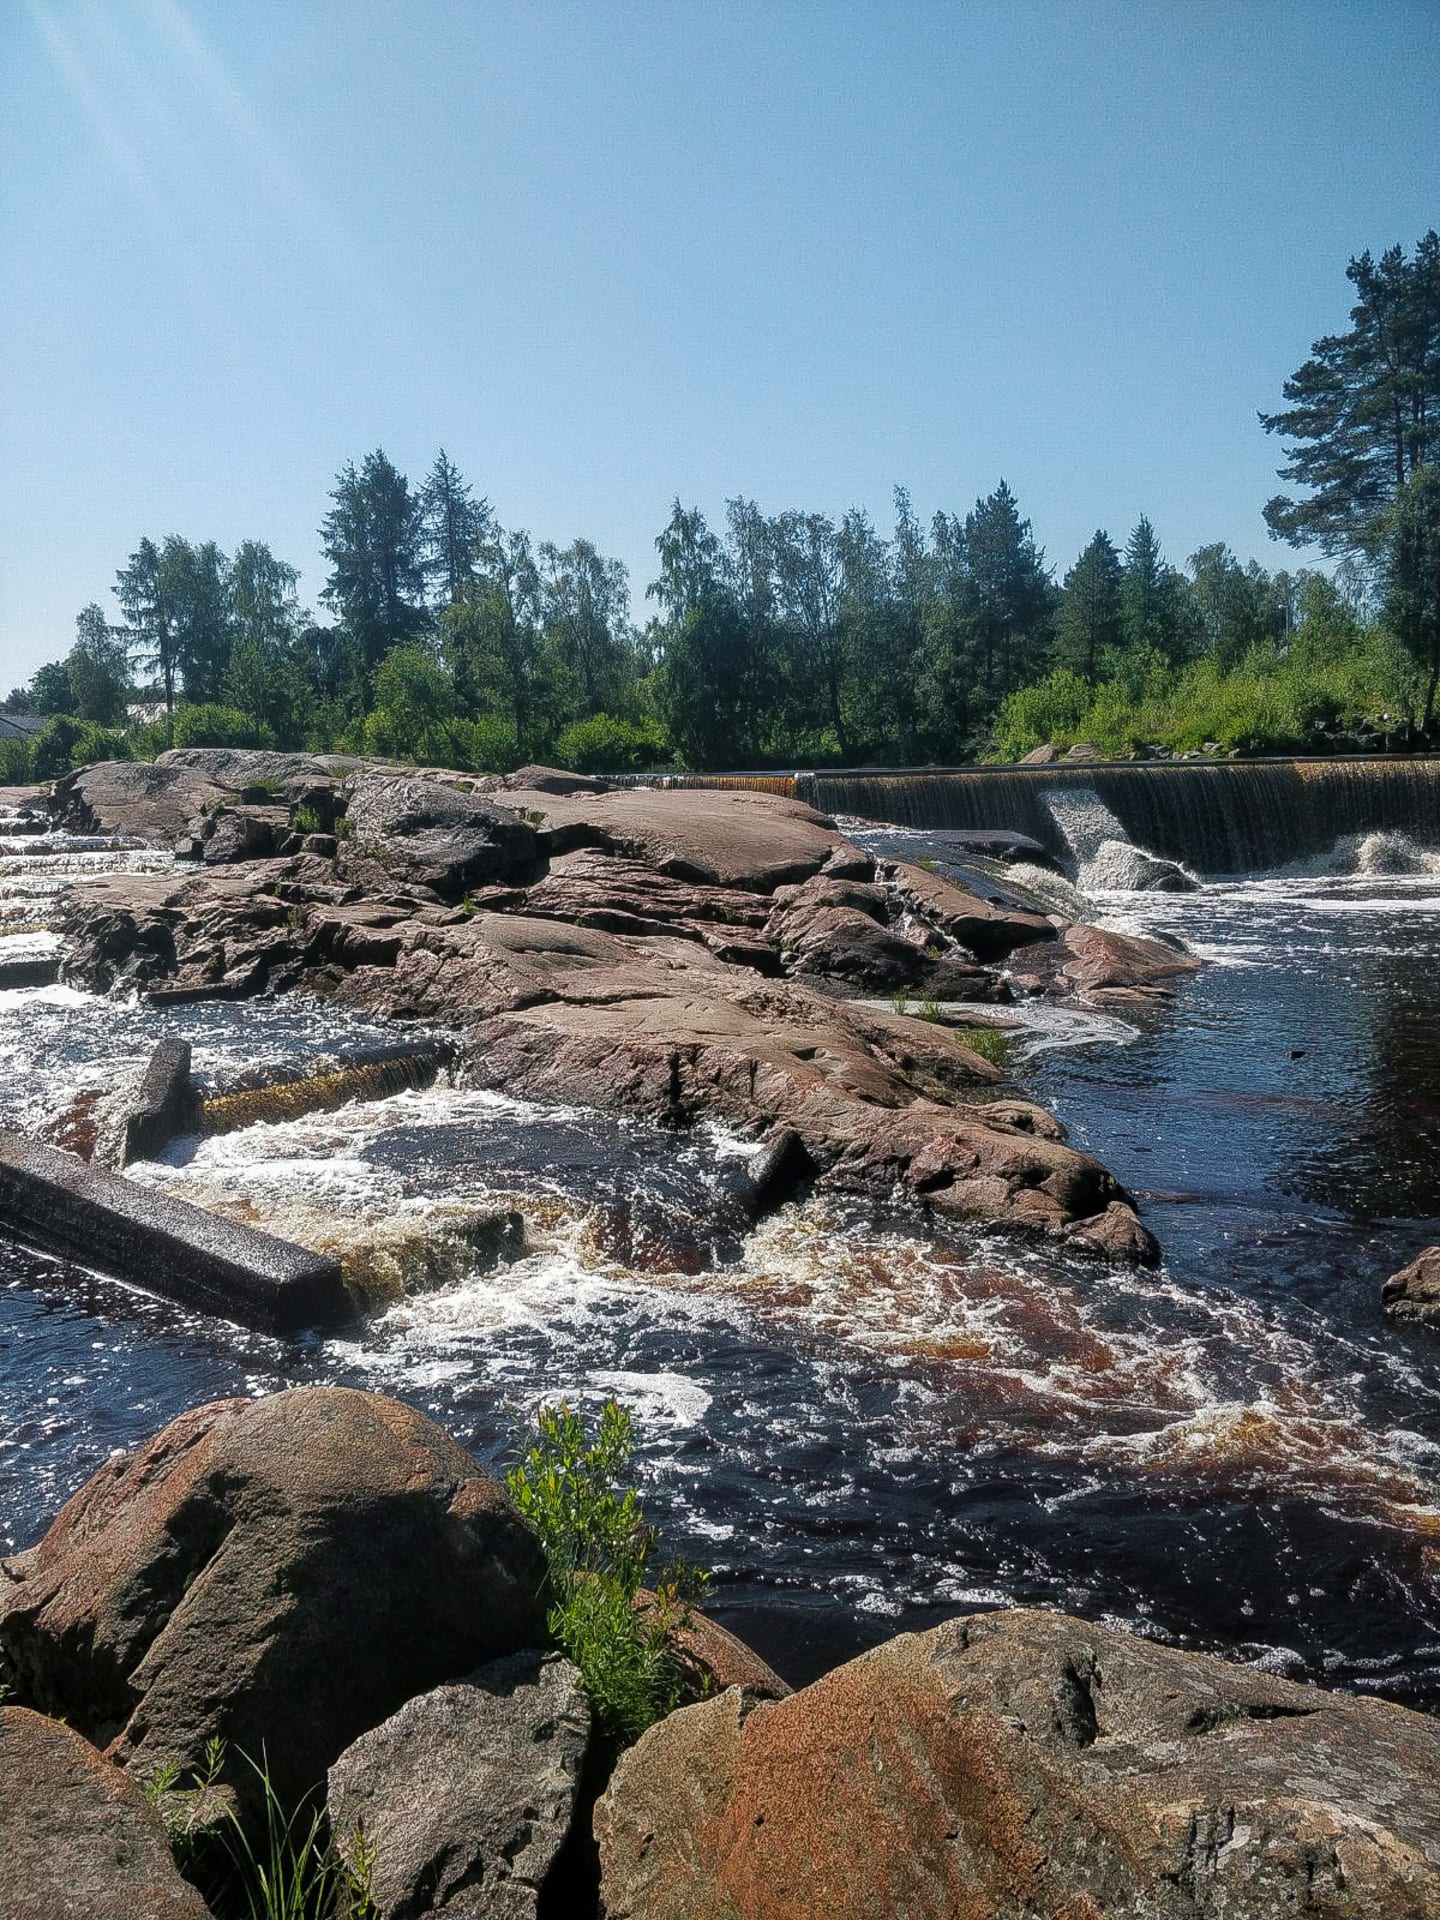 View from the northern side, Hourunkoski rapids and fish steps in Pyhäjoki